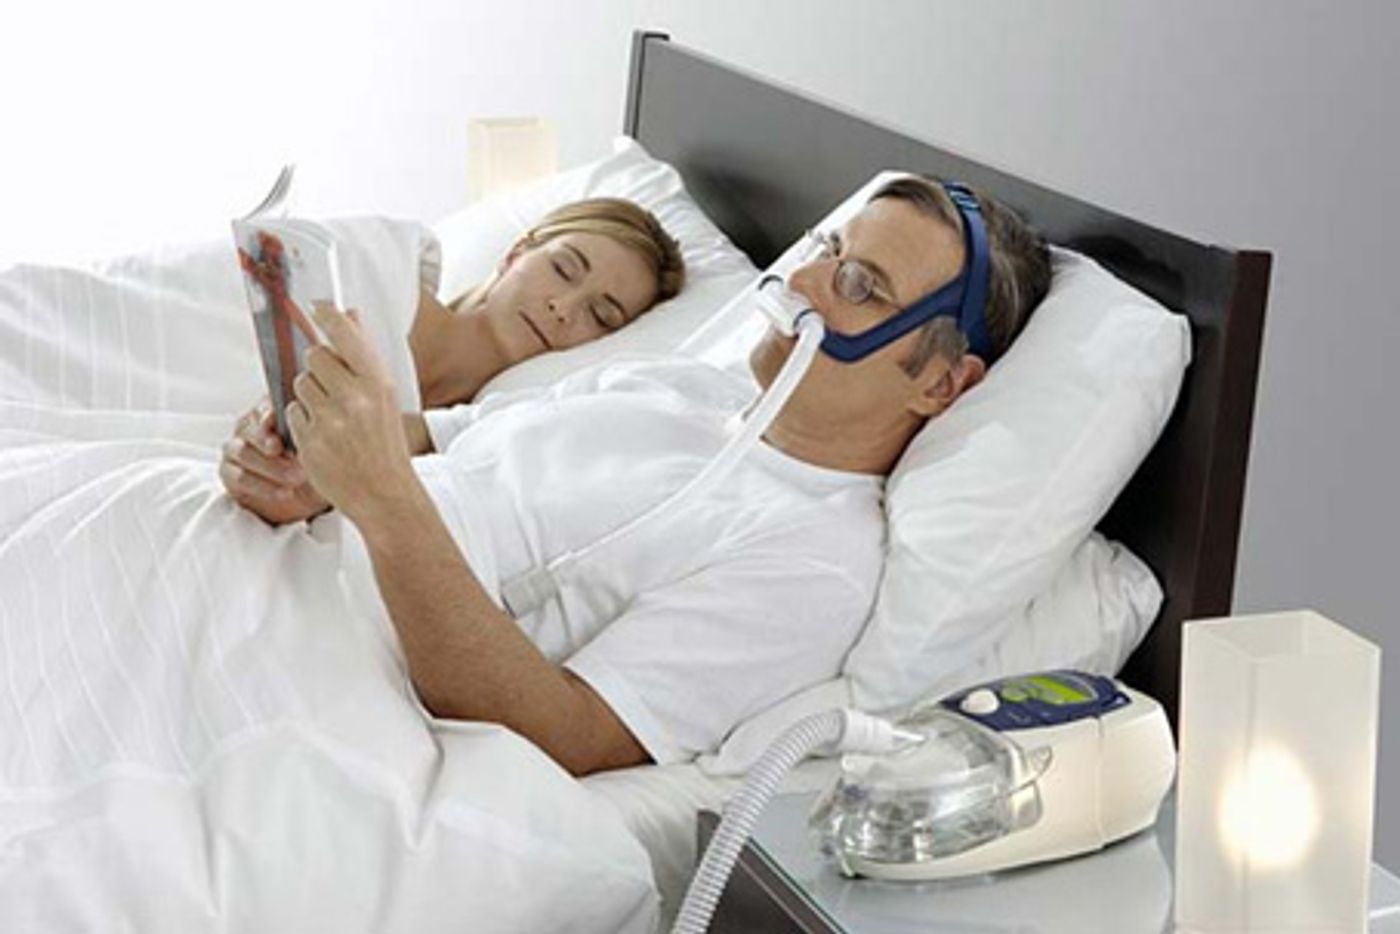 The CPAP machine is given to patients with sleep apnea to help open up their airwaves.